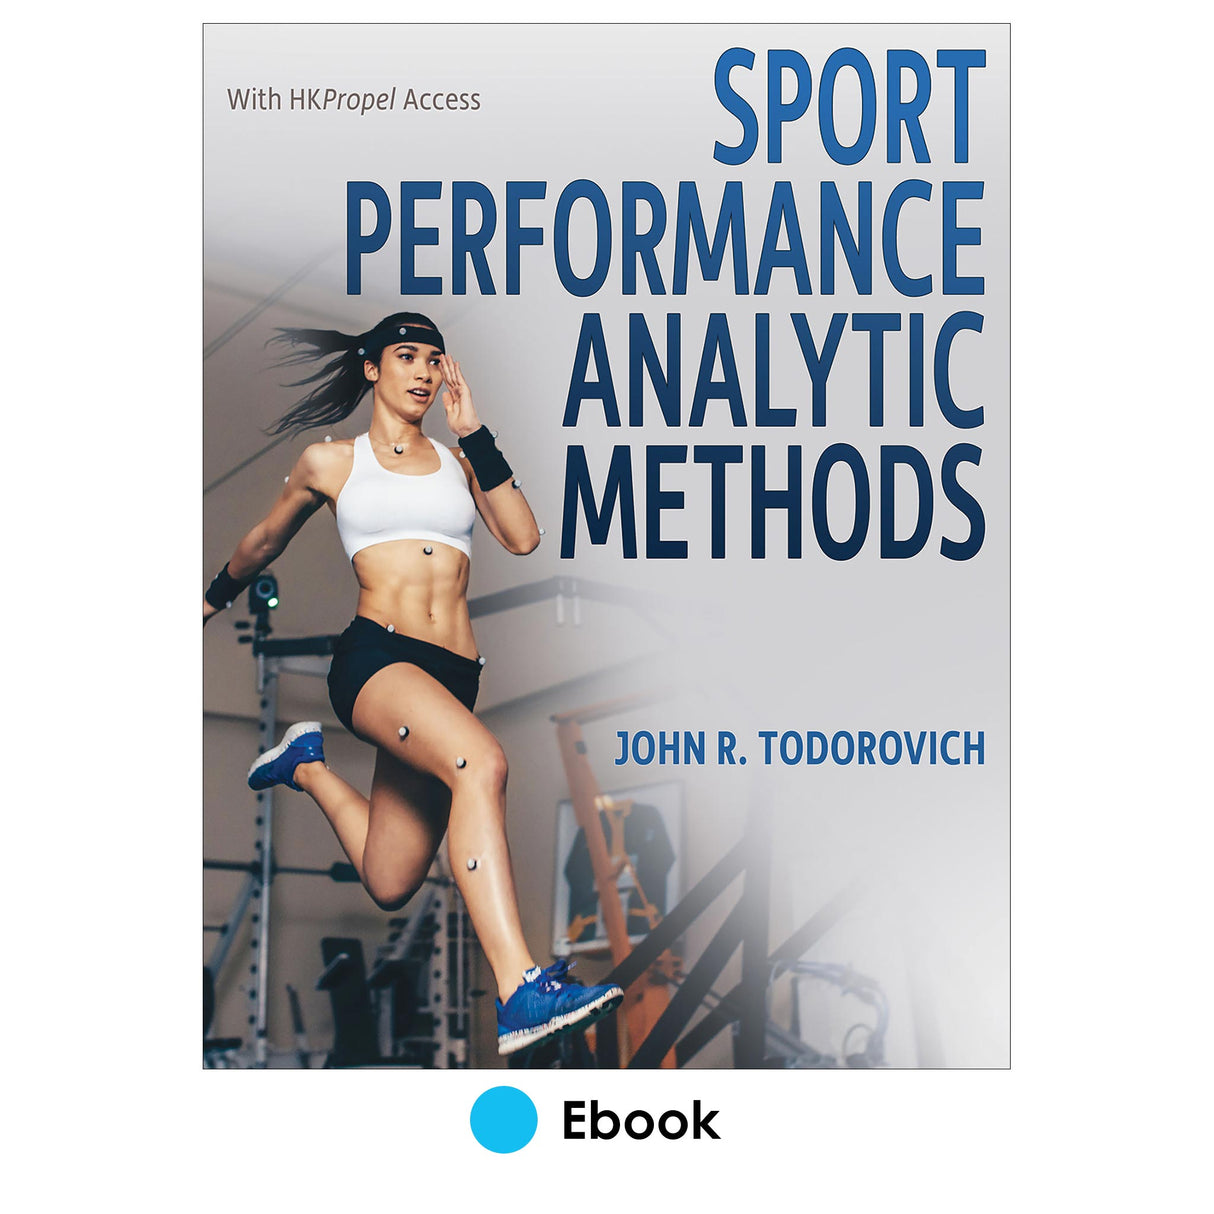 Sport Performance Analytic Methods Ebook With HKPropel Access